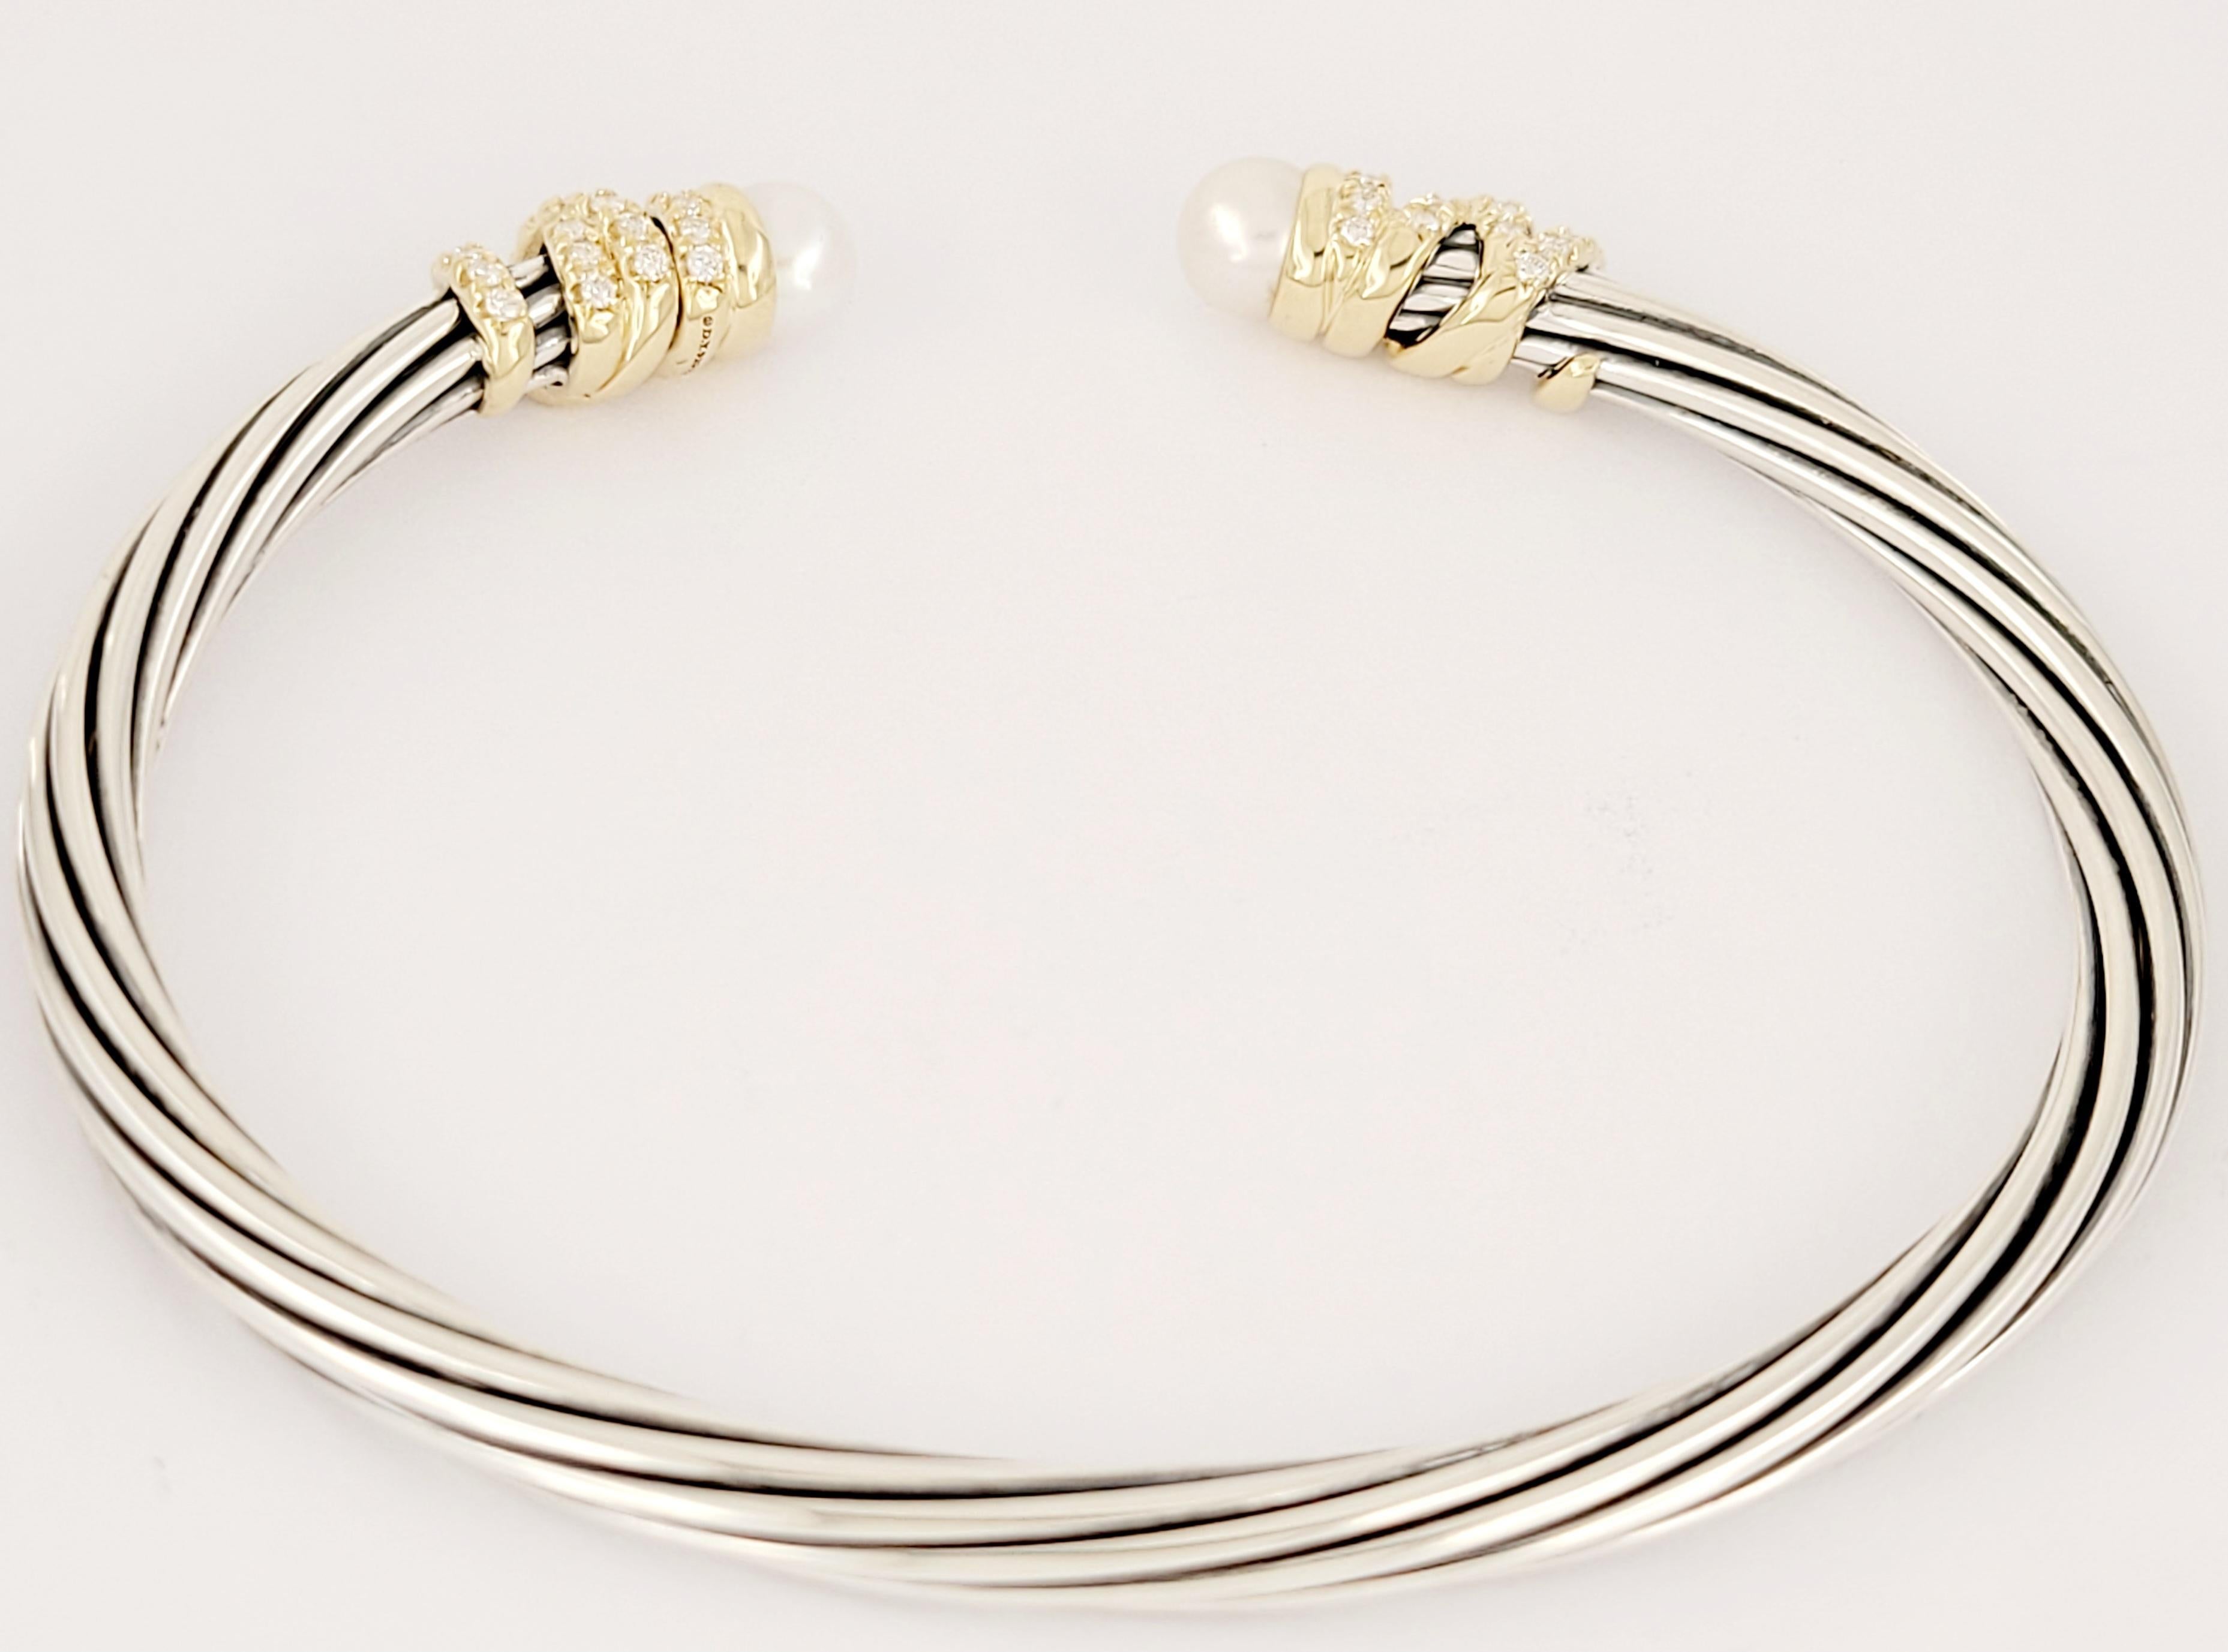 Brand David Yurman
Sterling Silver with 18K Yellow Gold 
Perl -Cultured freshwater pearls, 5-5.5mm
Gold-Dome -18K gold domes
Pave diamonds, 0.45 total weight
Bracelet comes with David Yurman Bracelet Box